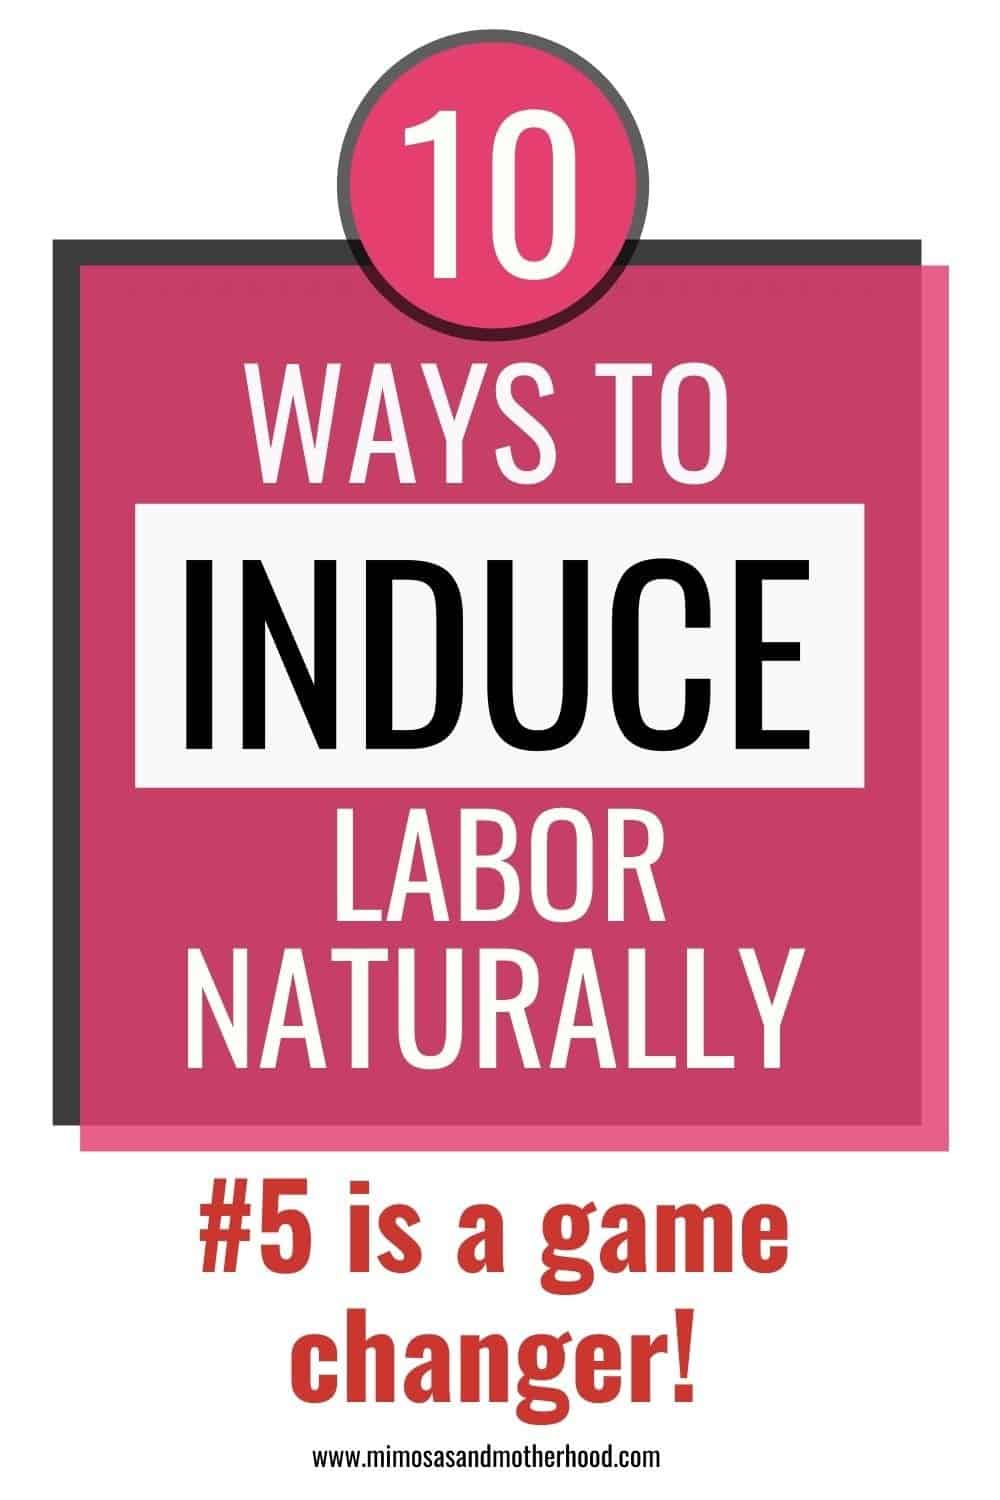 How to Induce Labor Naturally